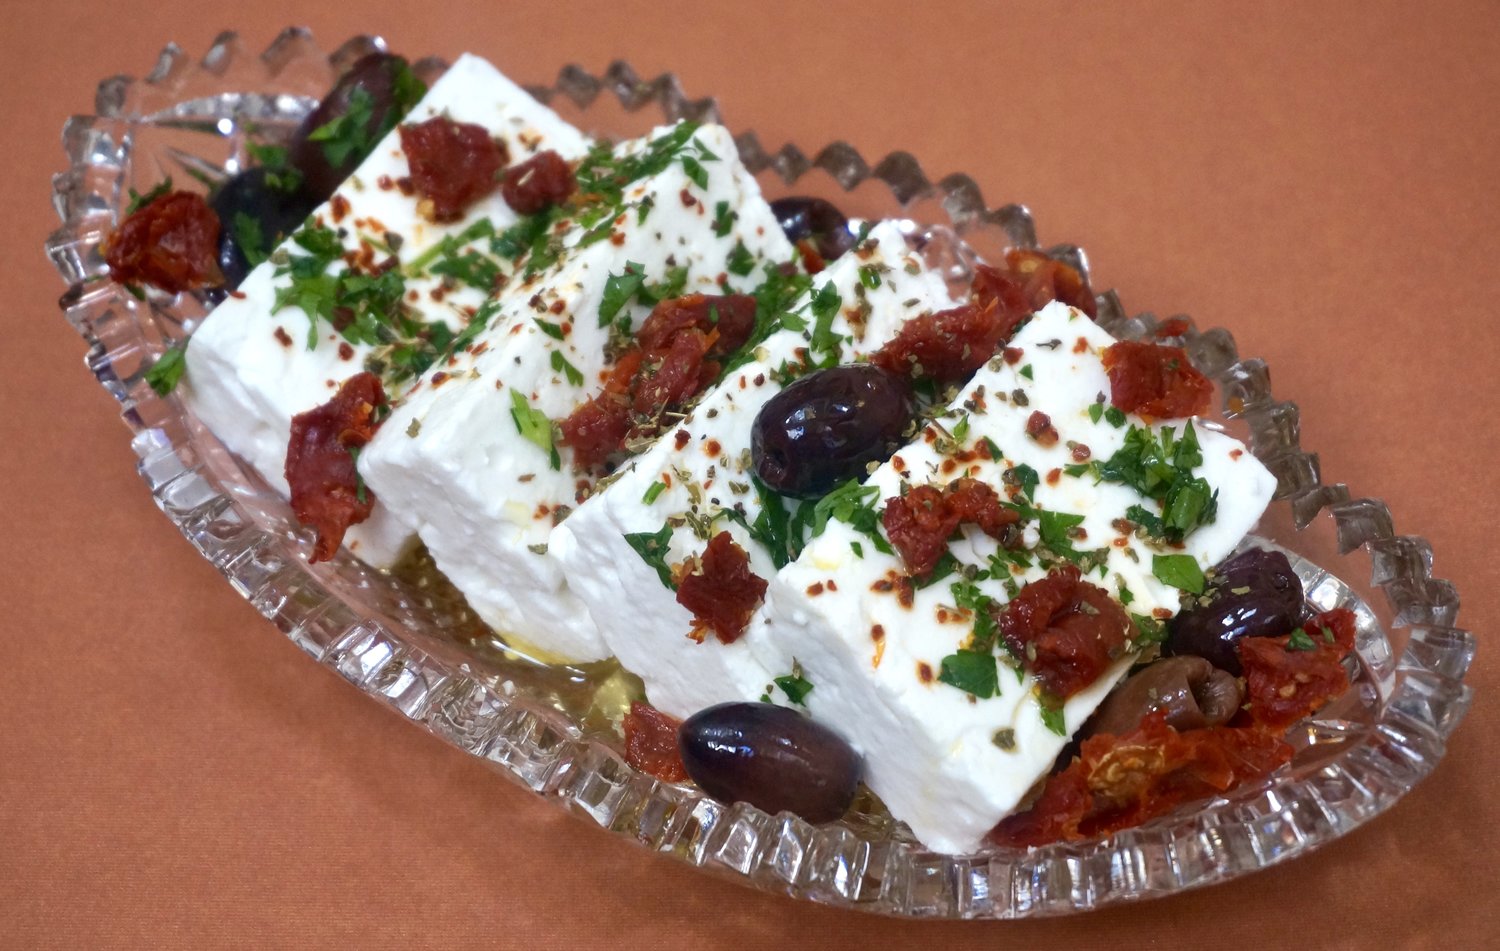 Herbed Feta Cheese with Sundried Tomatoes and Olives from Ronnie Fein